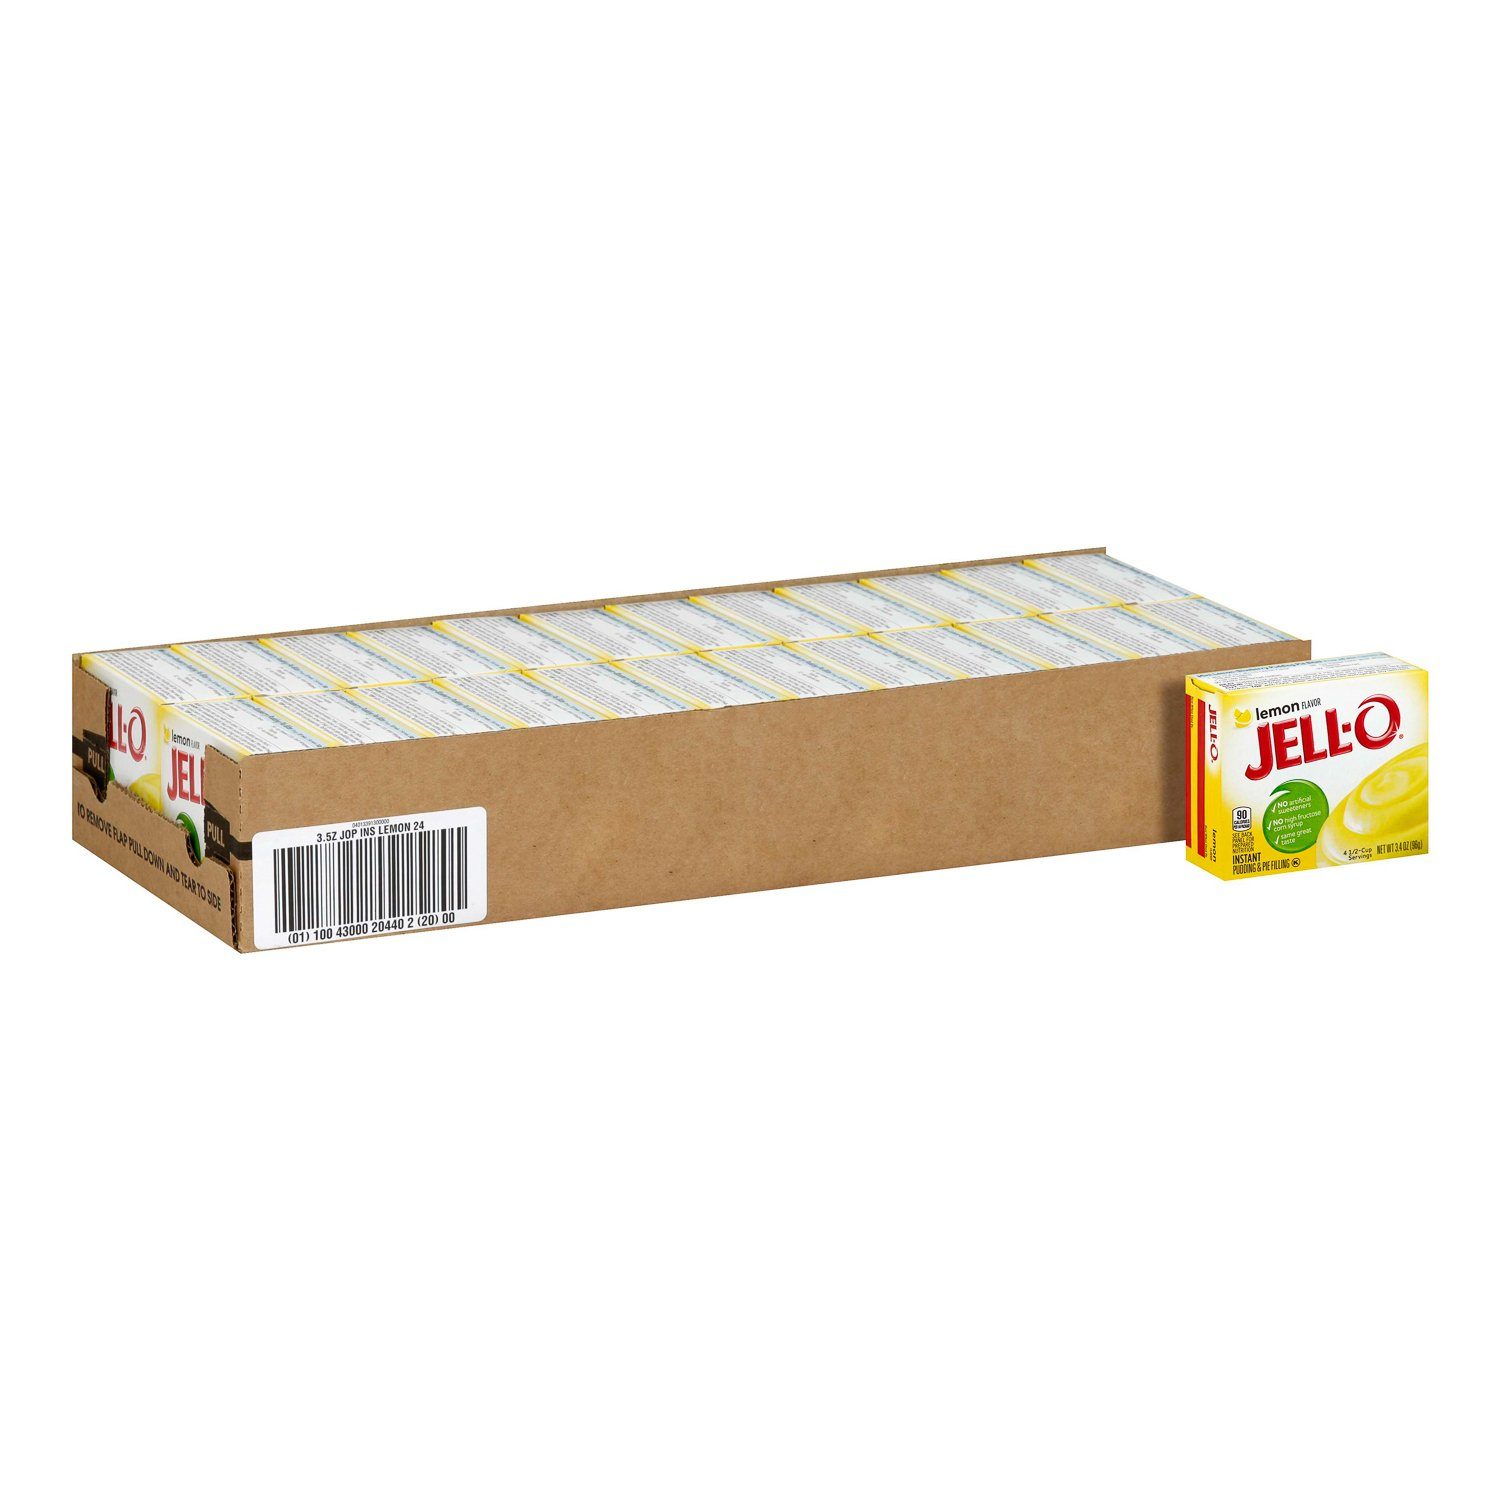 Jell-O Instant Pudding & Pie Filling Mixes Jell-O Lemon 3.4 Oz-24 Count 